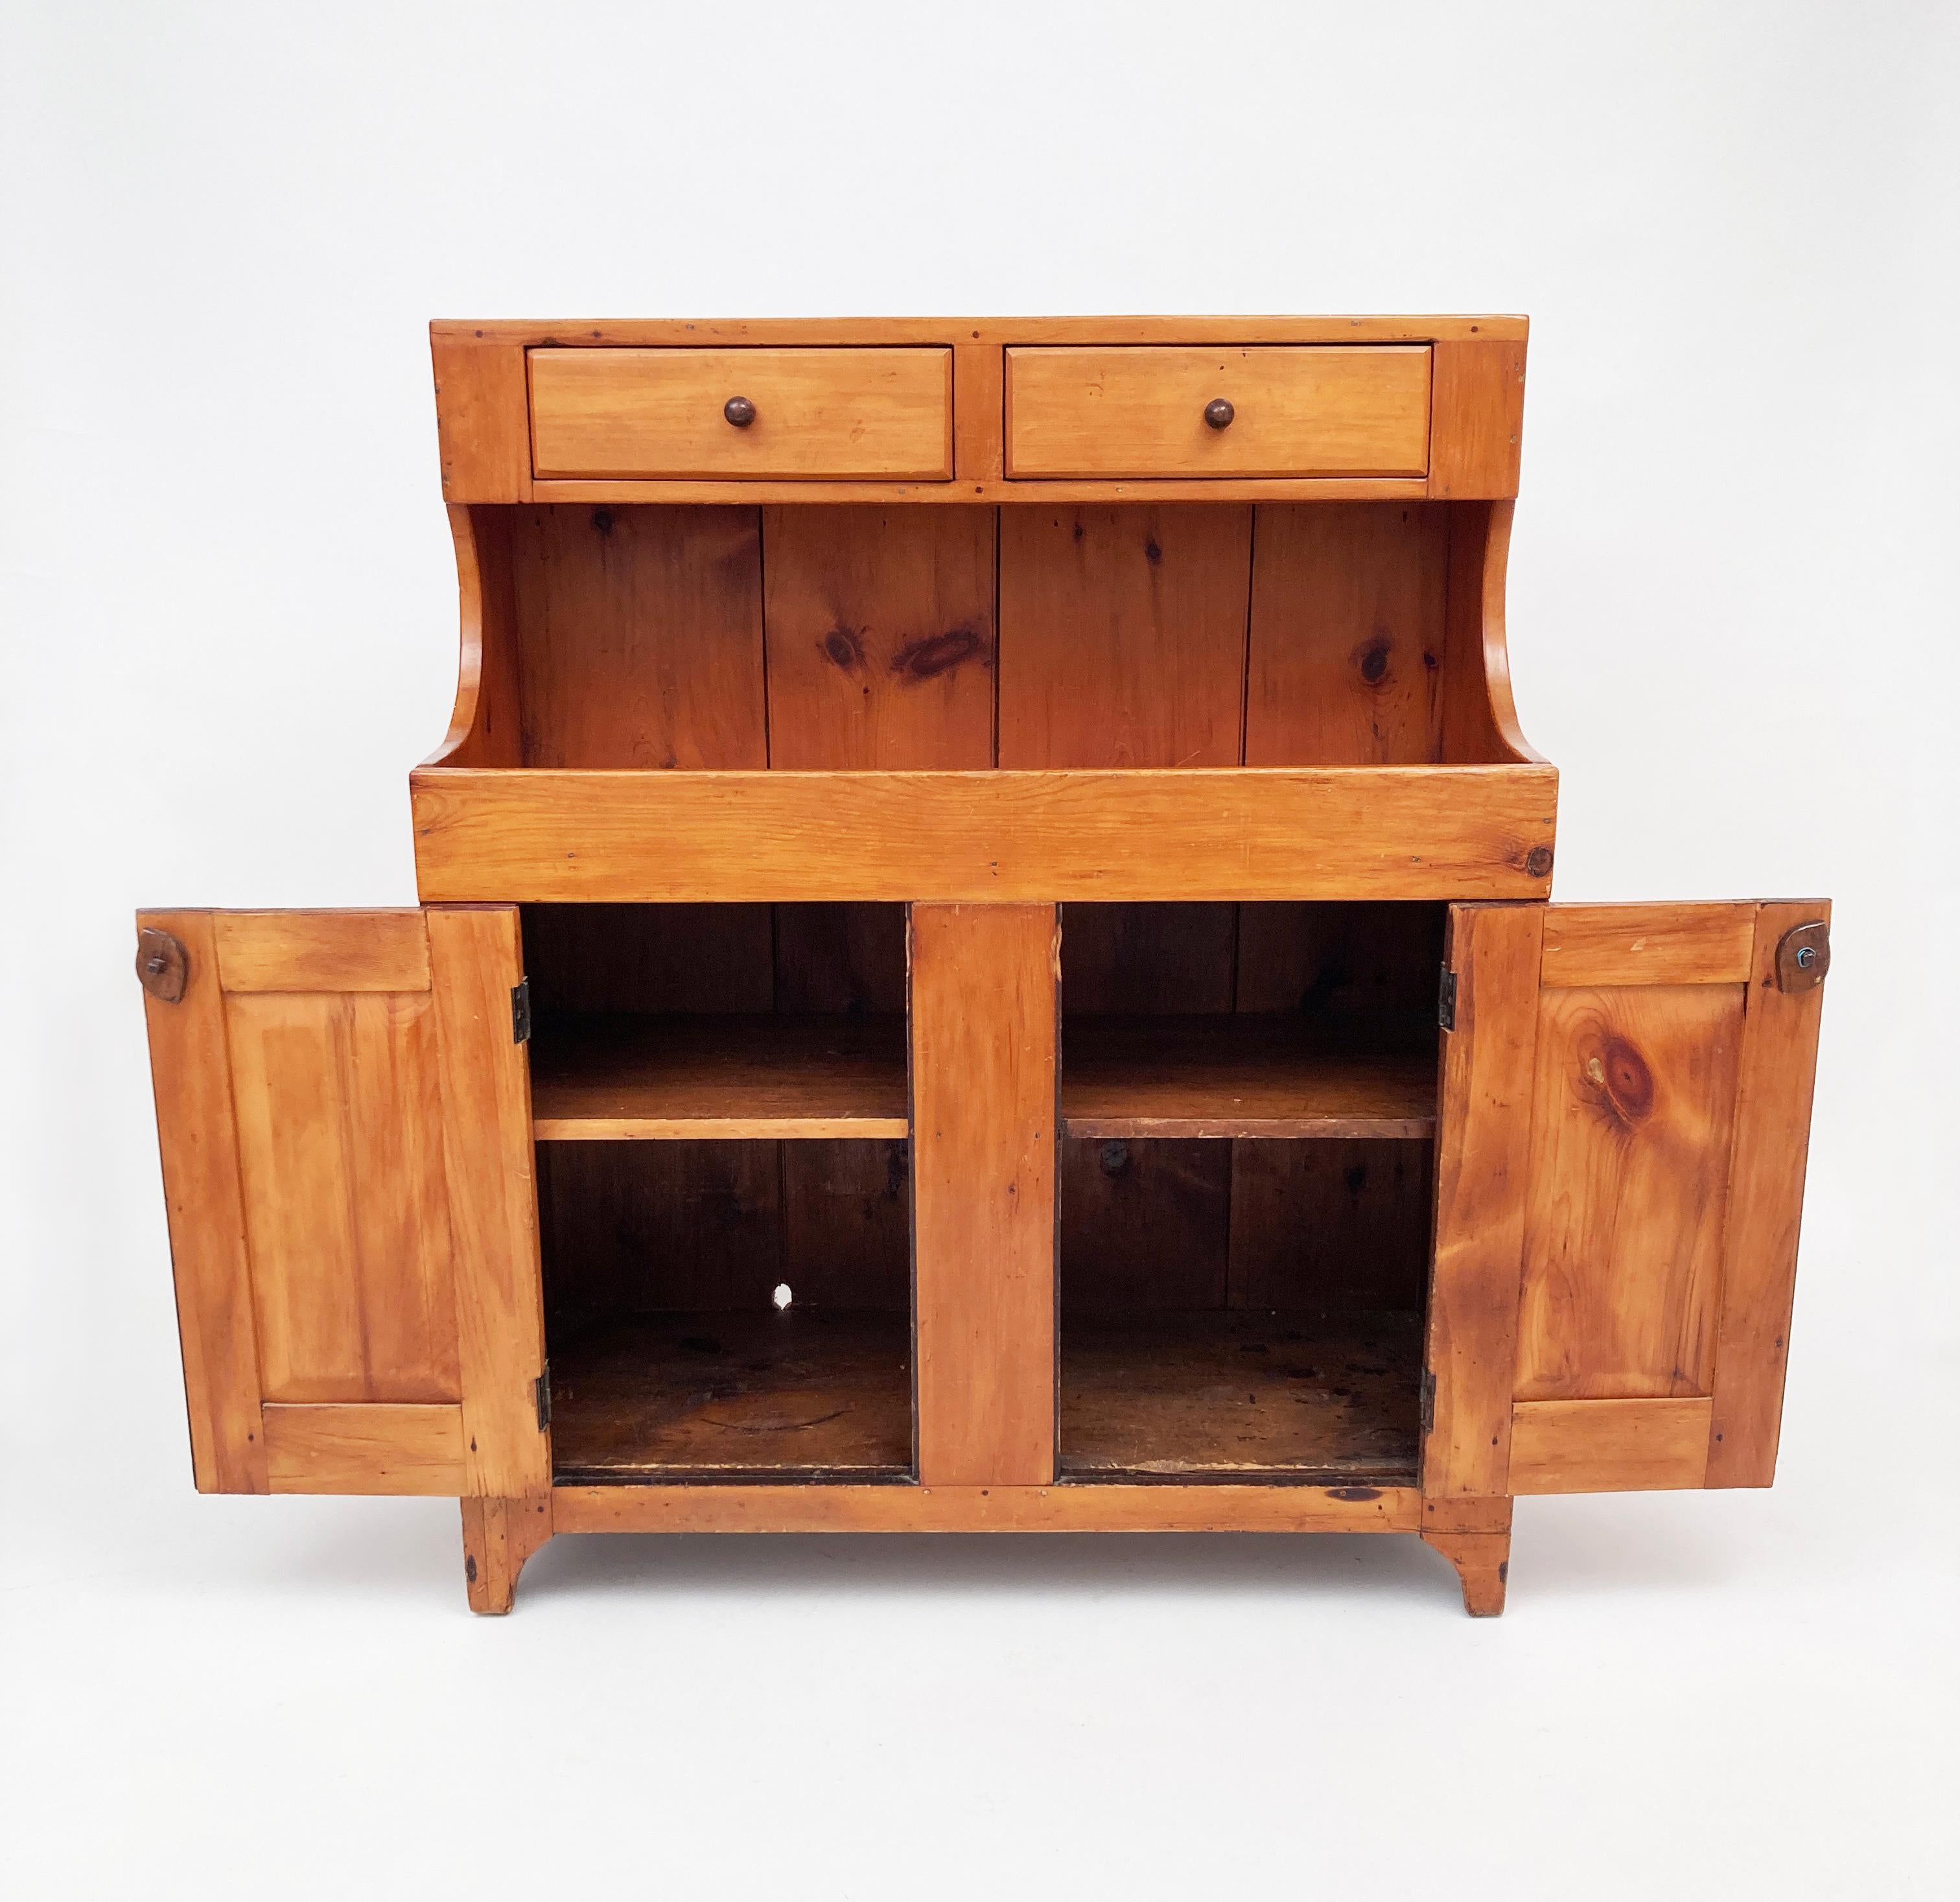 This very early American pine dry sink is a primitive beauty. The impressive craftsmanship that went into the construction of this piece has allowed it to stand the test of time. The entire piece is constructed and joined with hand chiseled dove